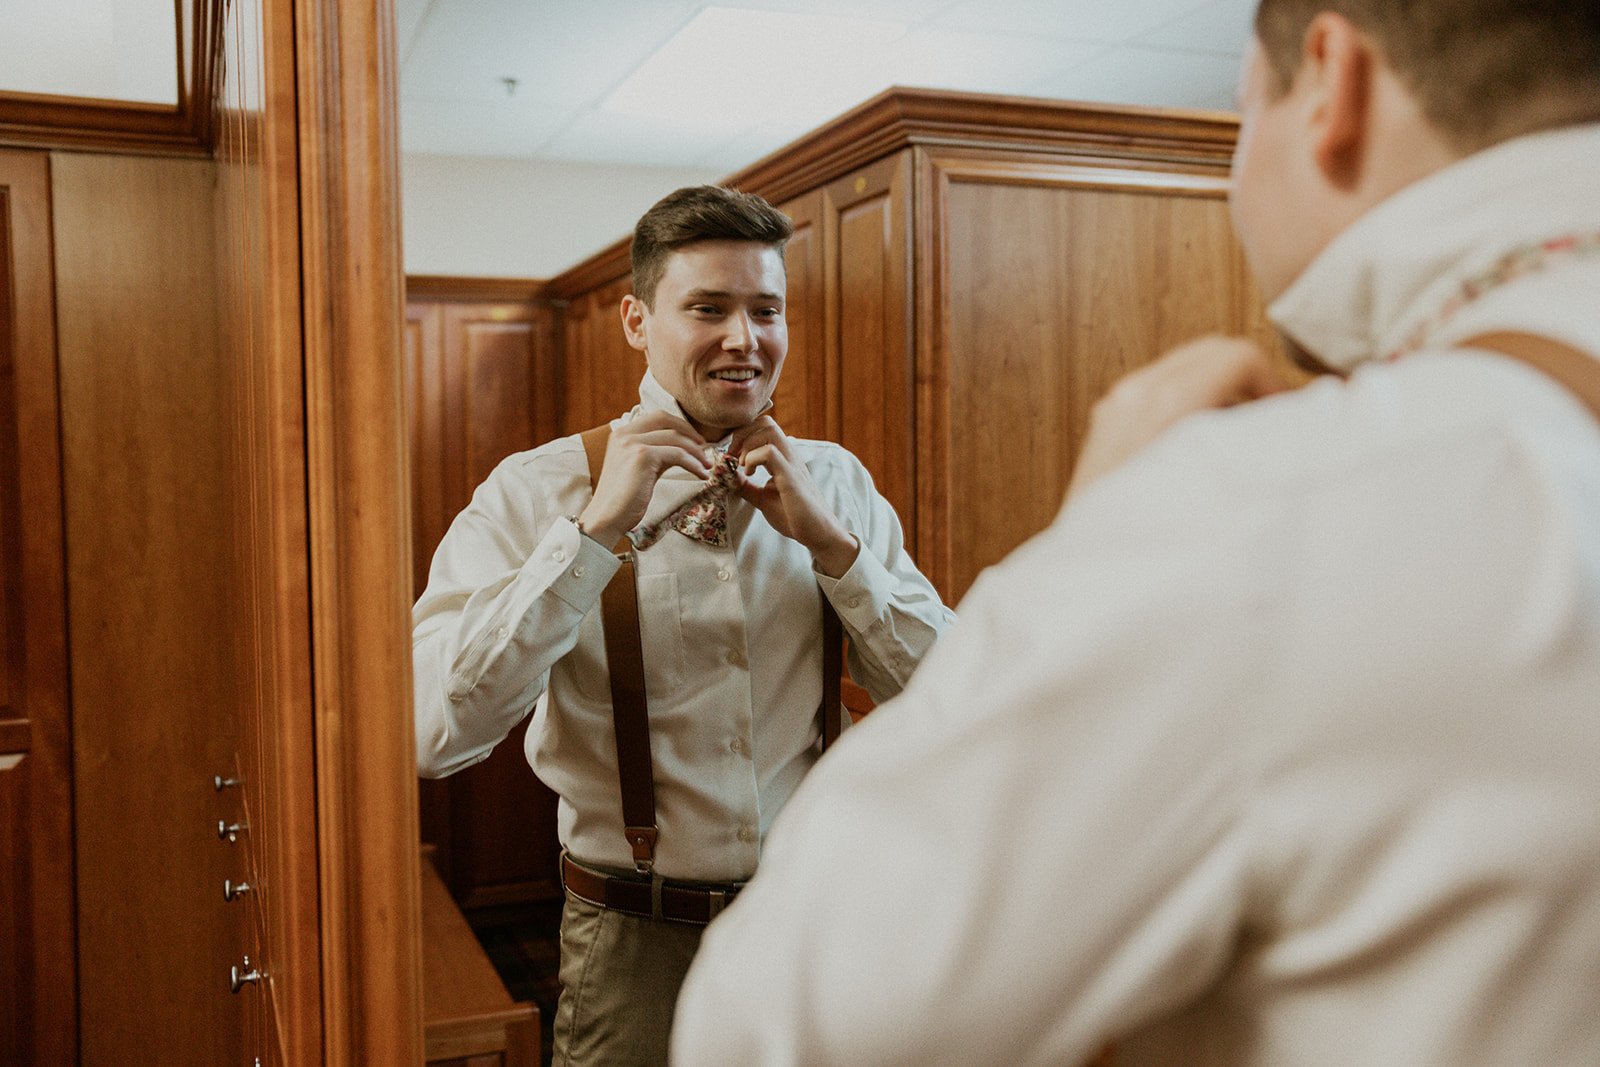 Groomsmen looks at himself in the mirror while tying his bow tie.